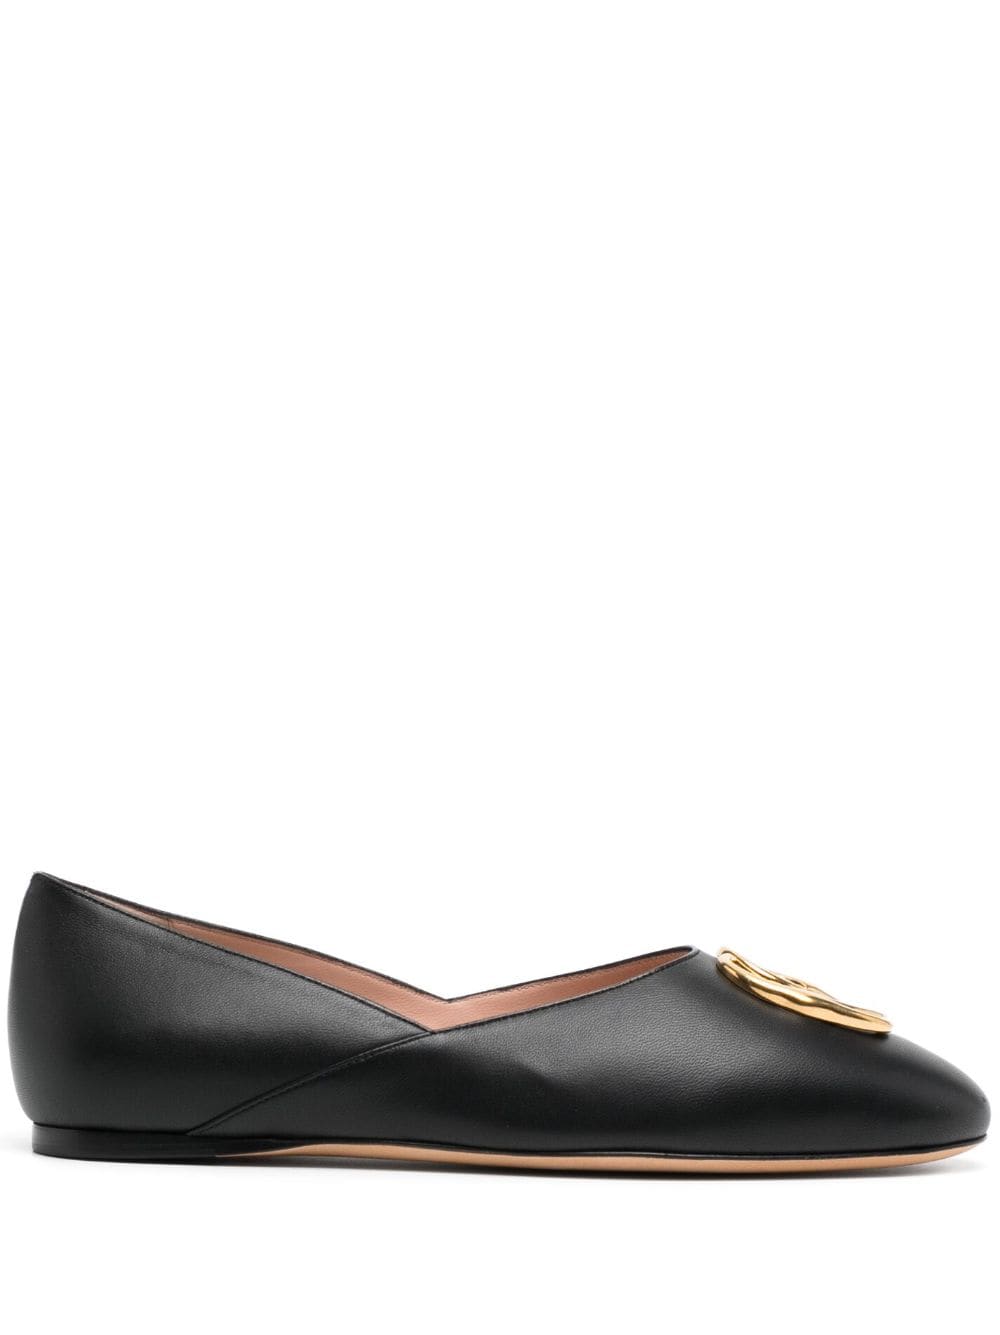 Bally Gerry leather ballerina shoes - Black